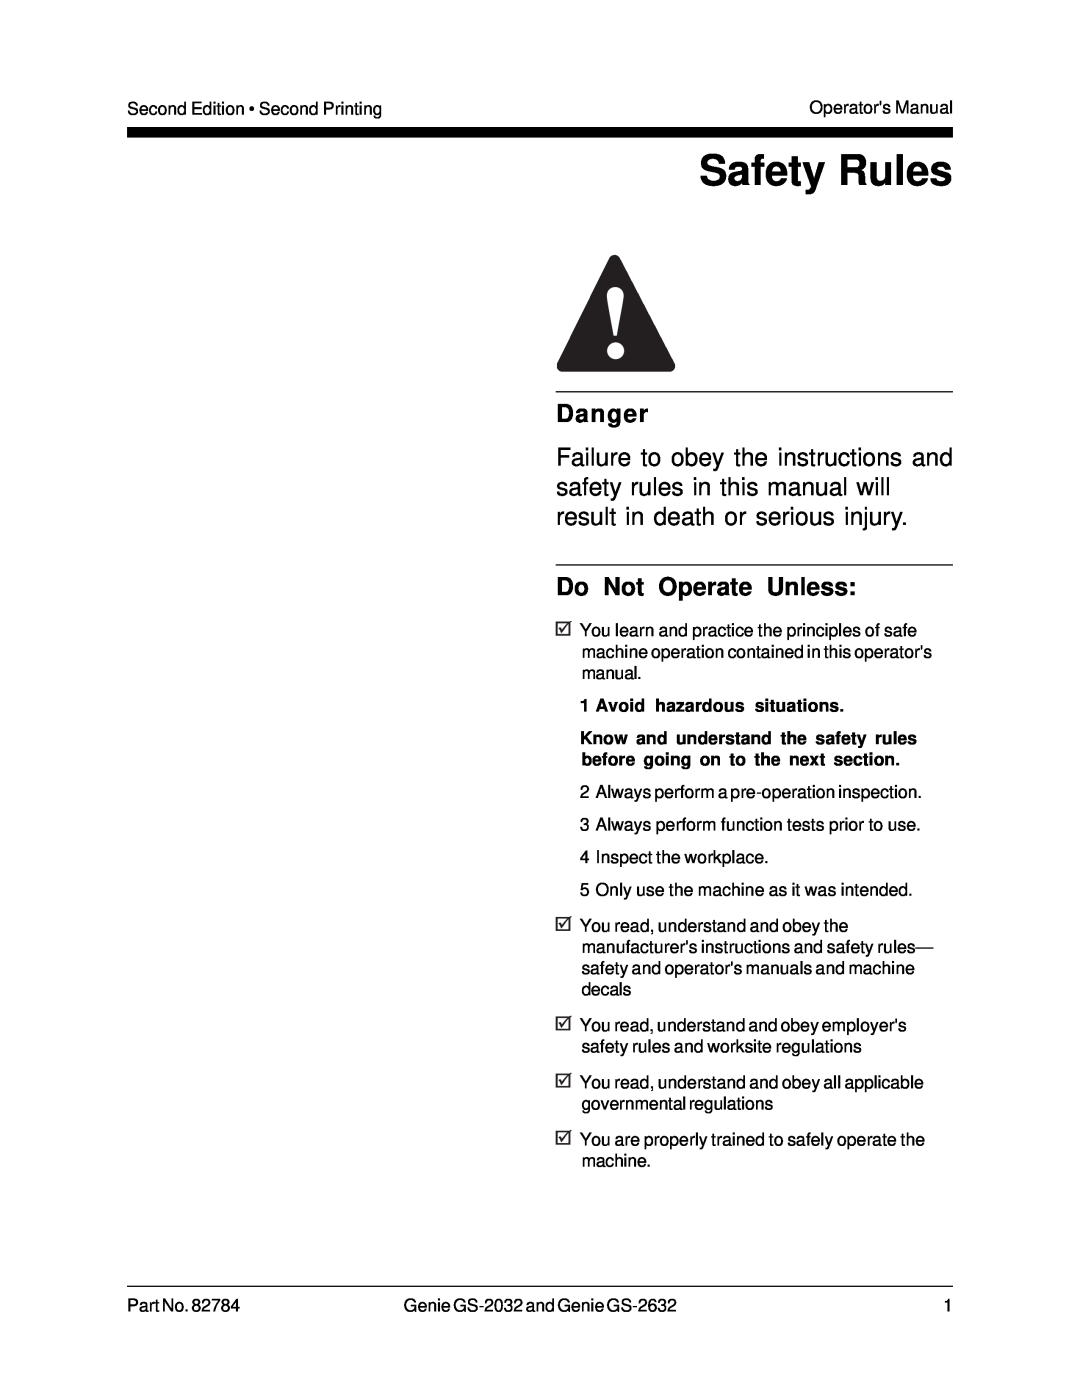 Genie GS-2632, CE, 82784, GS-2032 manual Safety Rules, Danger, Do Not Operate Unless, Avoid hazardous situations 